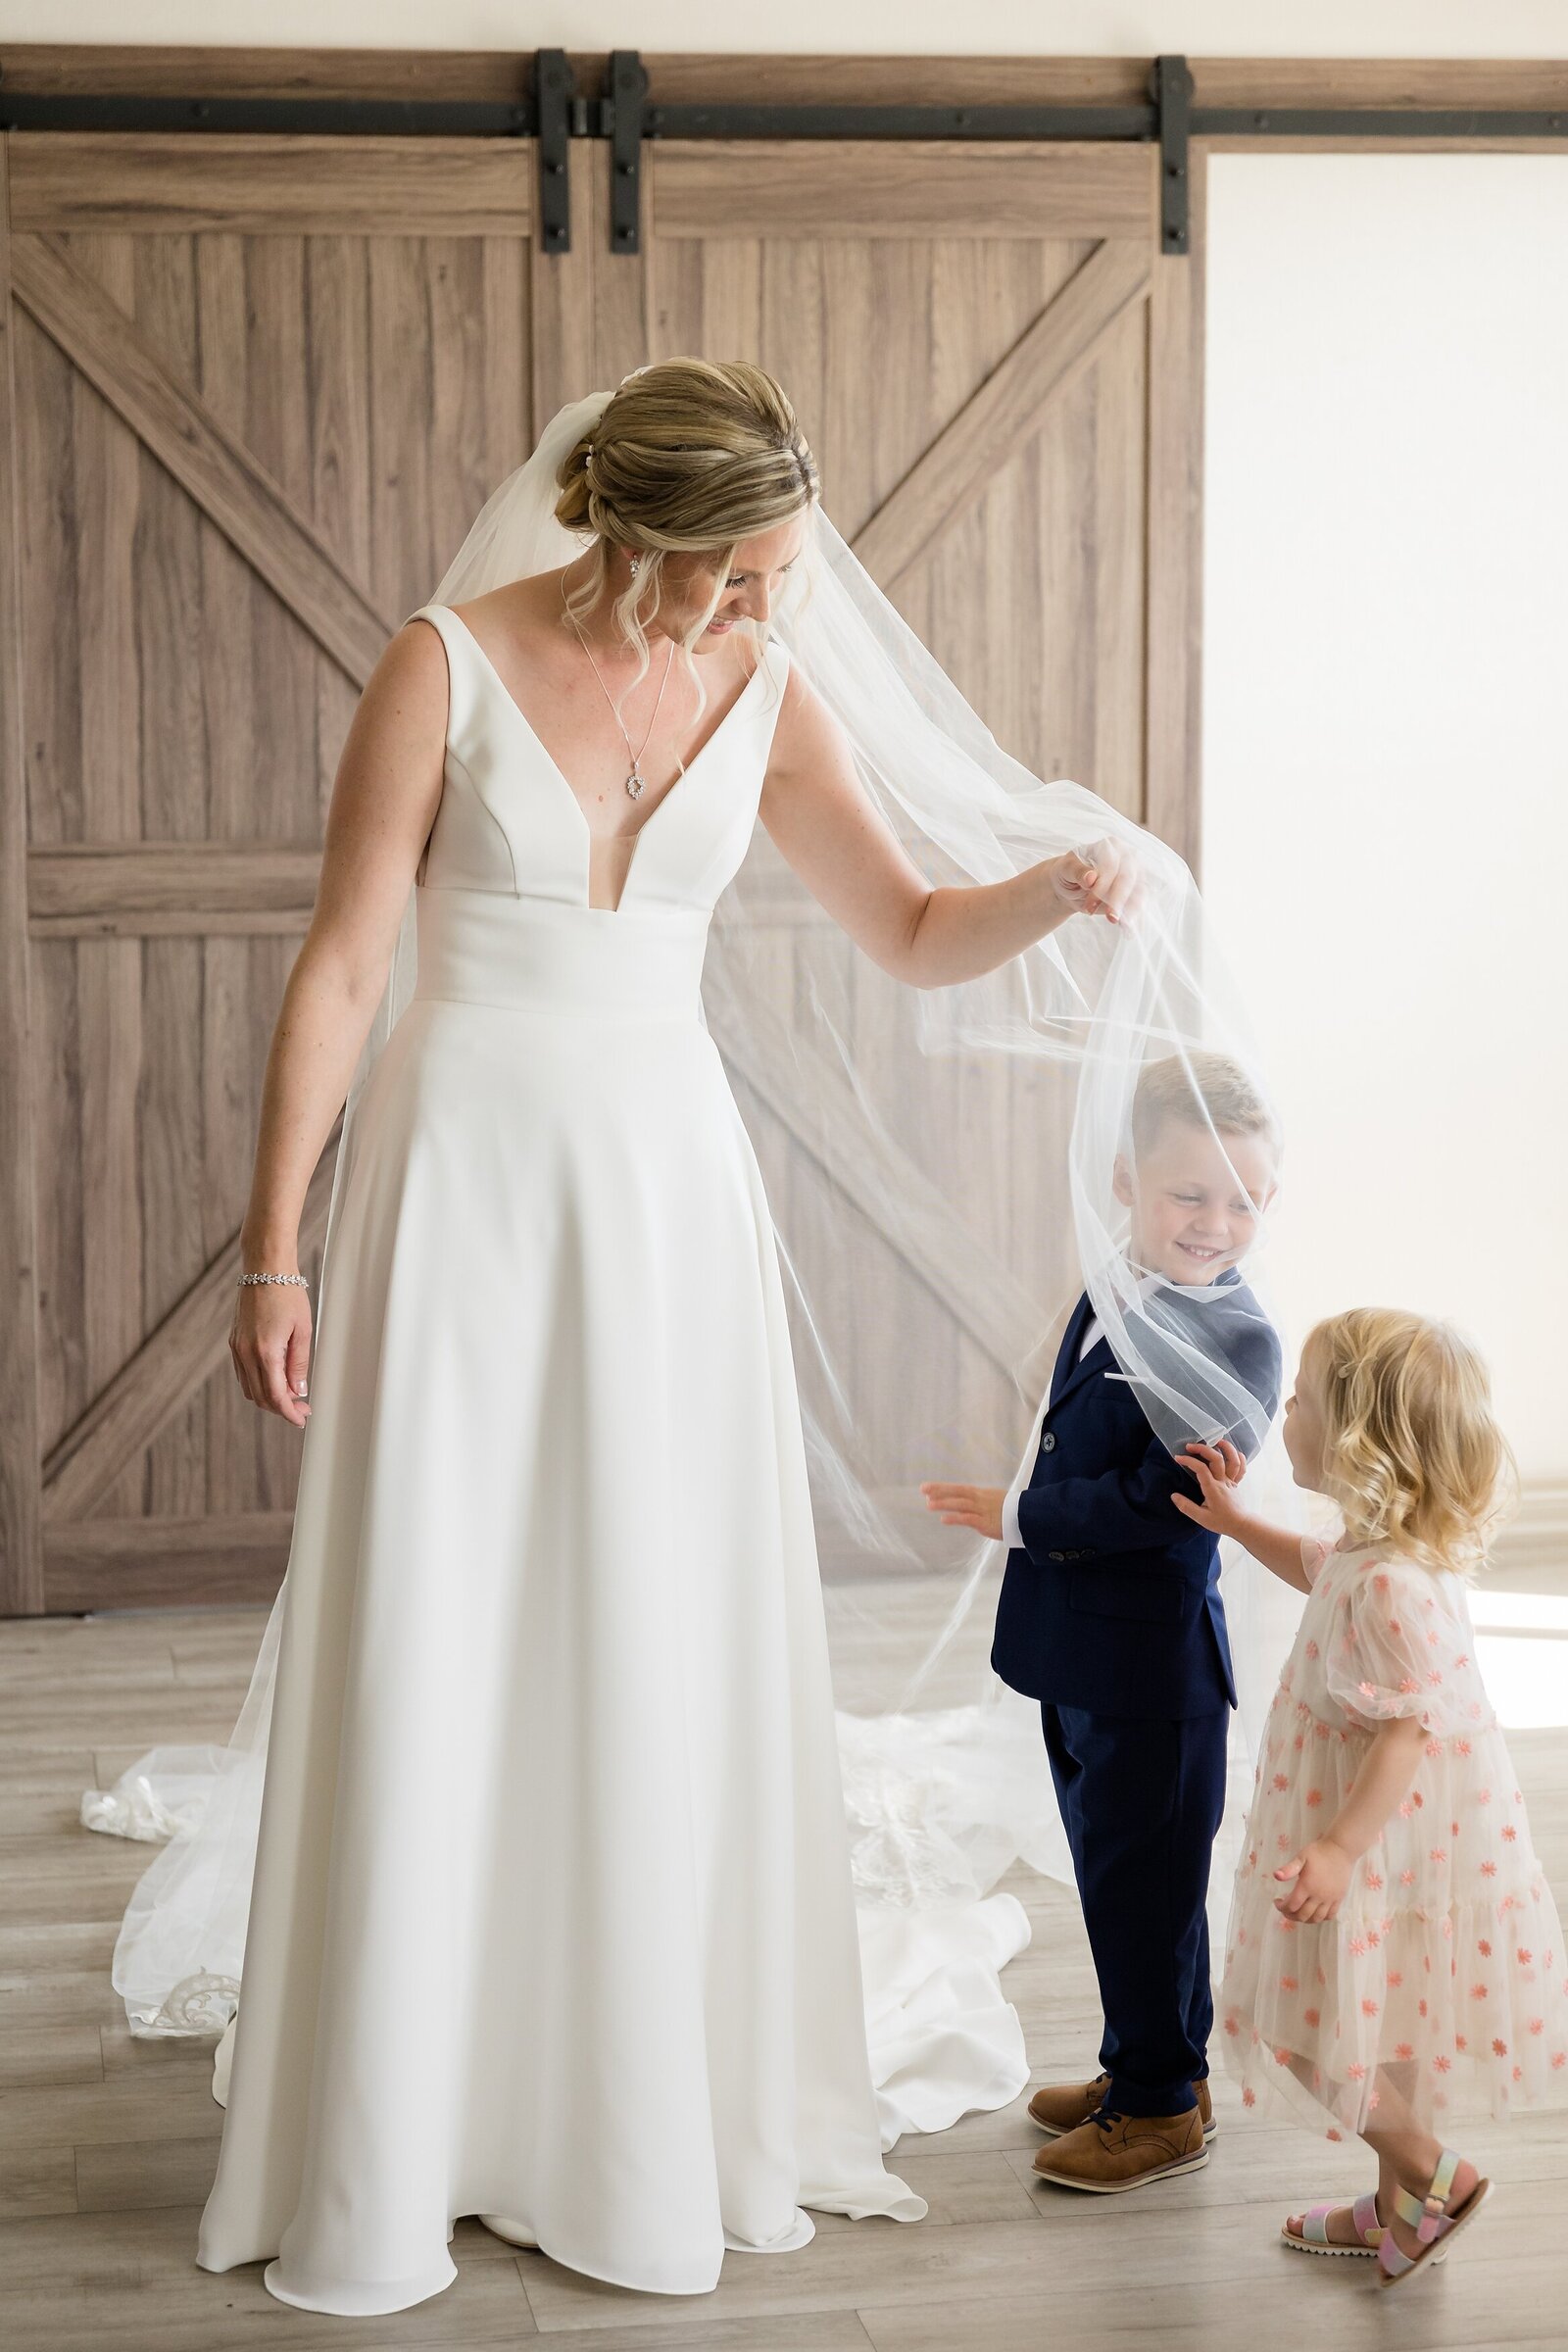 Ring-bearer-and-flower-girl-play-under-brides-veil-on-her-wedding-day-during-getting-ready